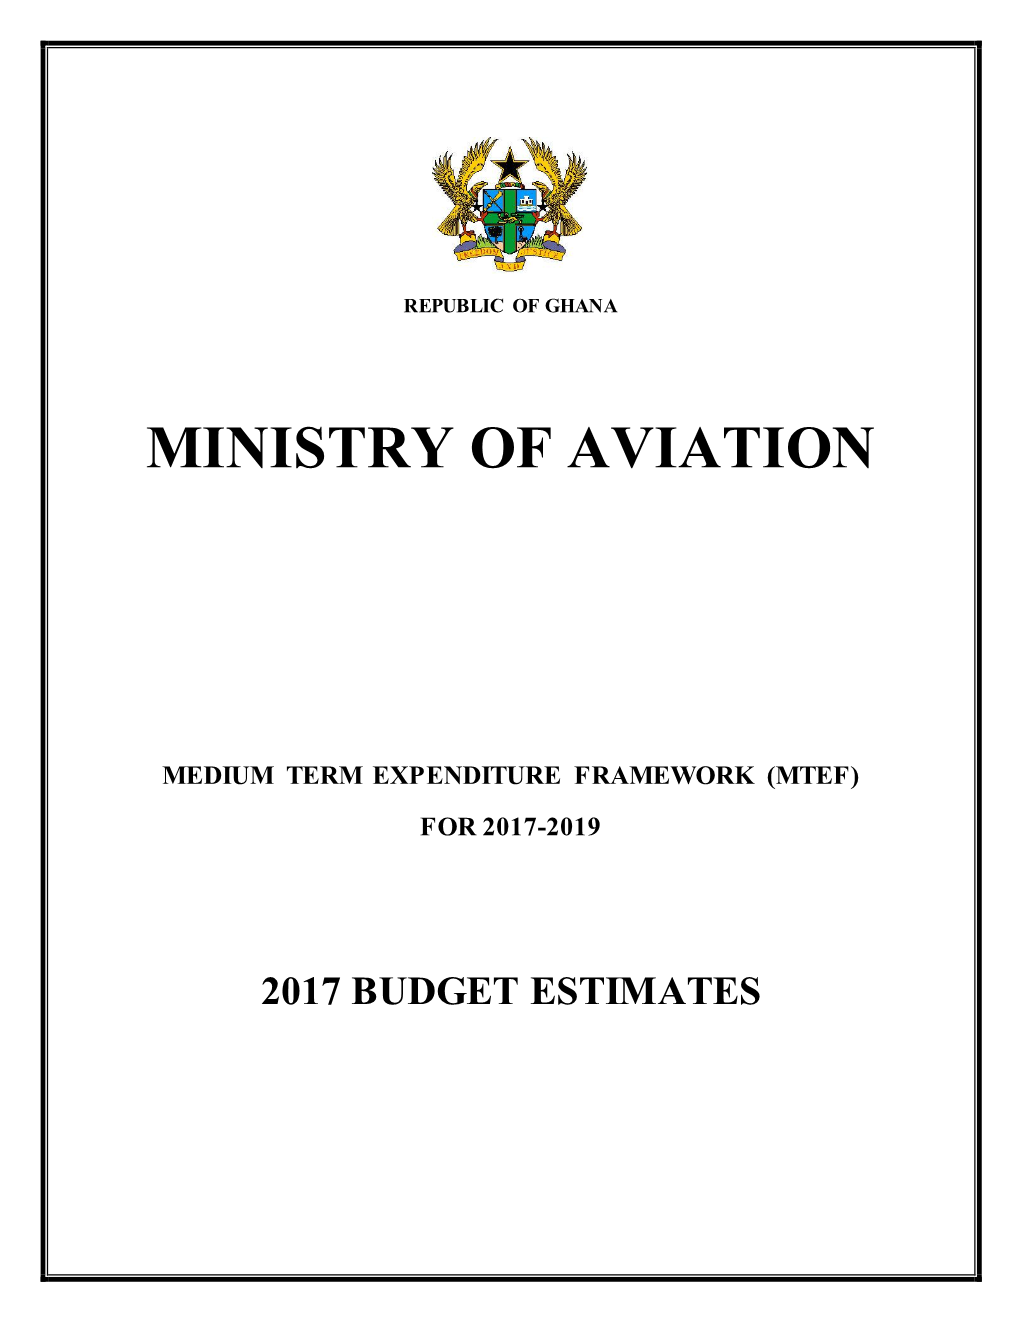 Ministry of Aviation